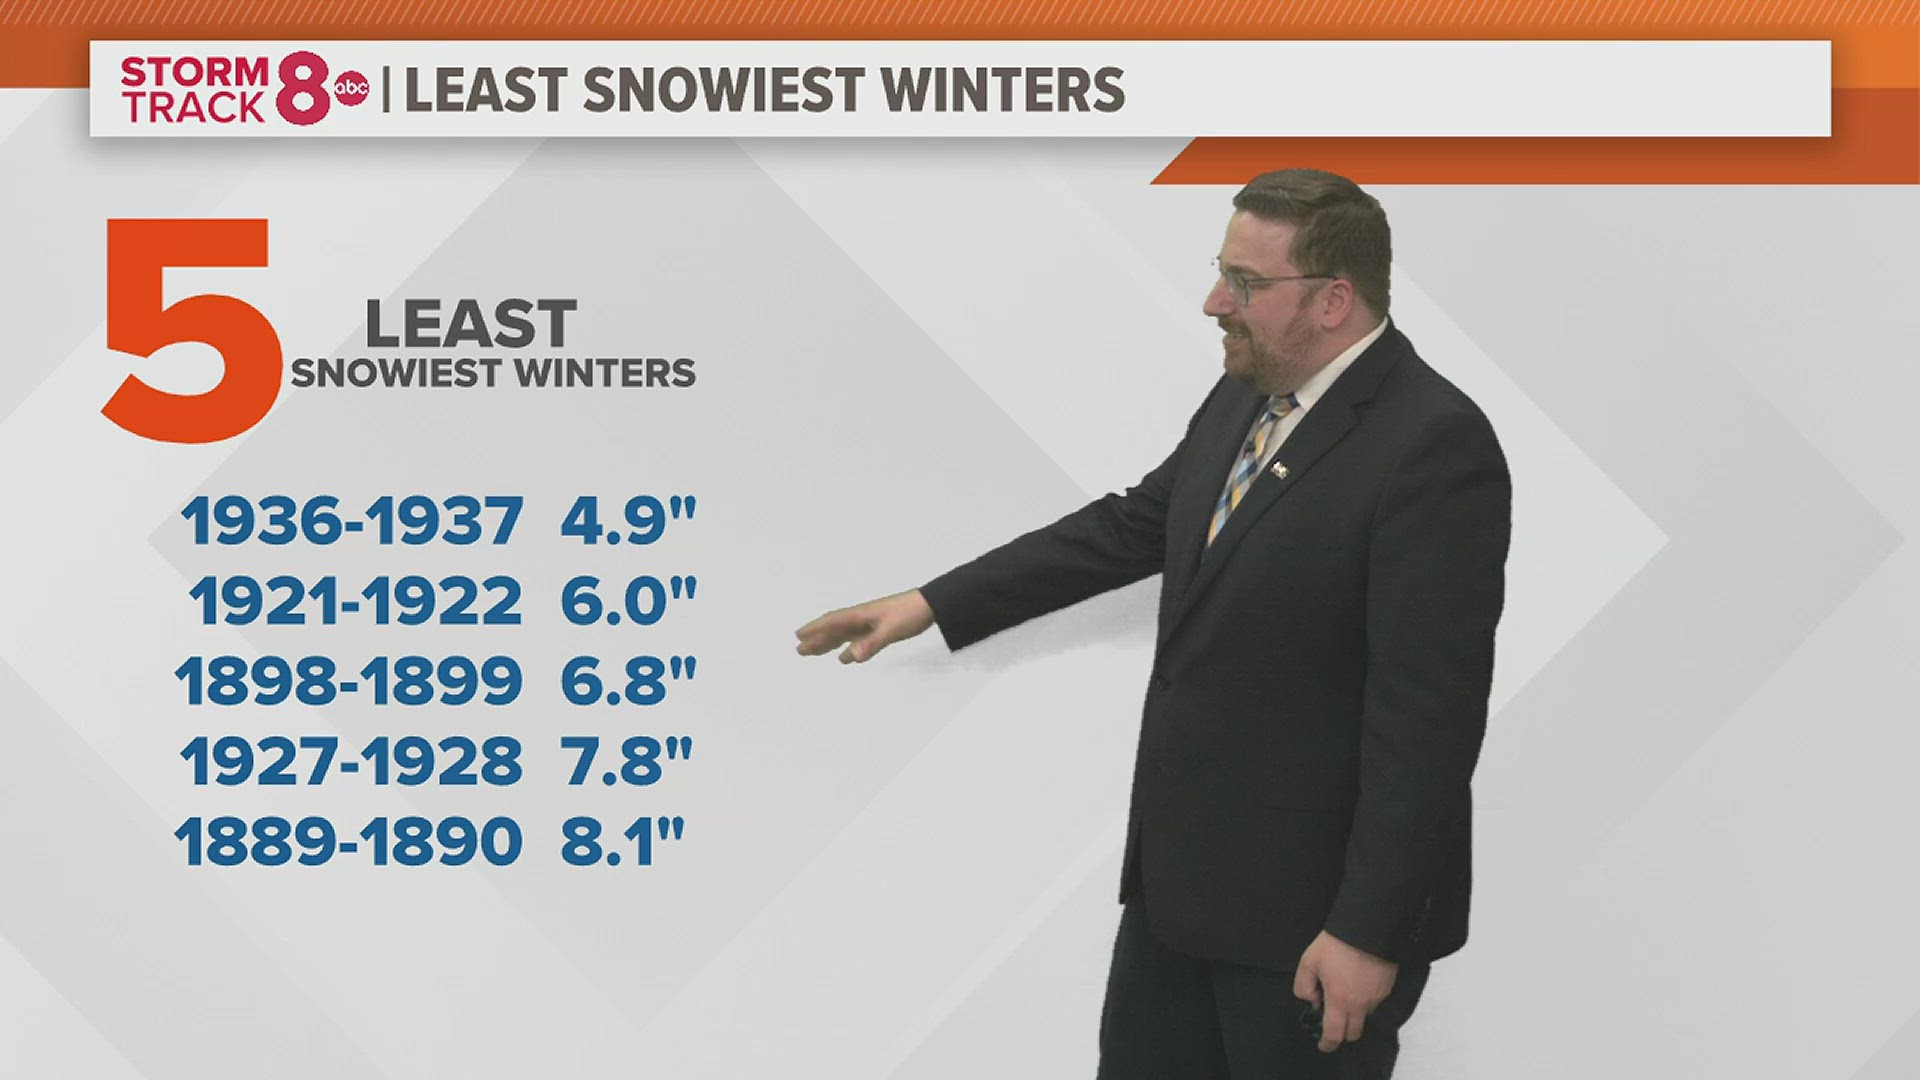 Tyler from Davenport, Iowa, asks which Quad Cities winters had the least amount of snowfall.